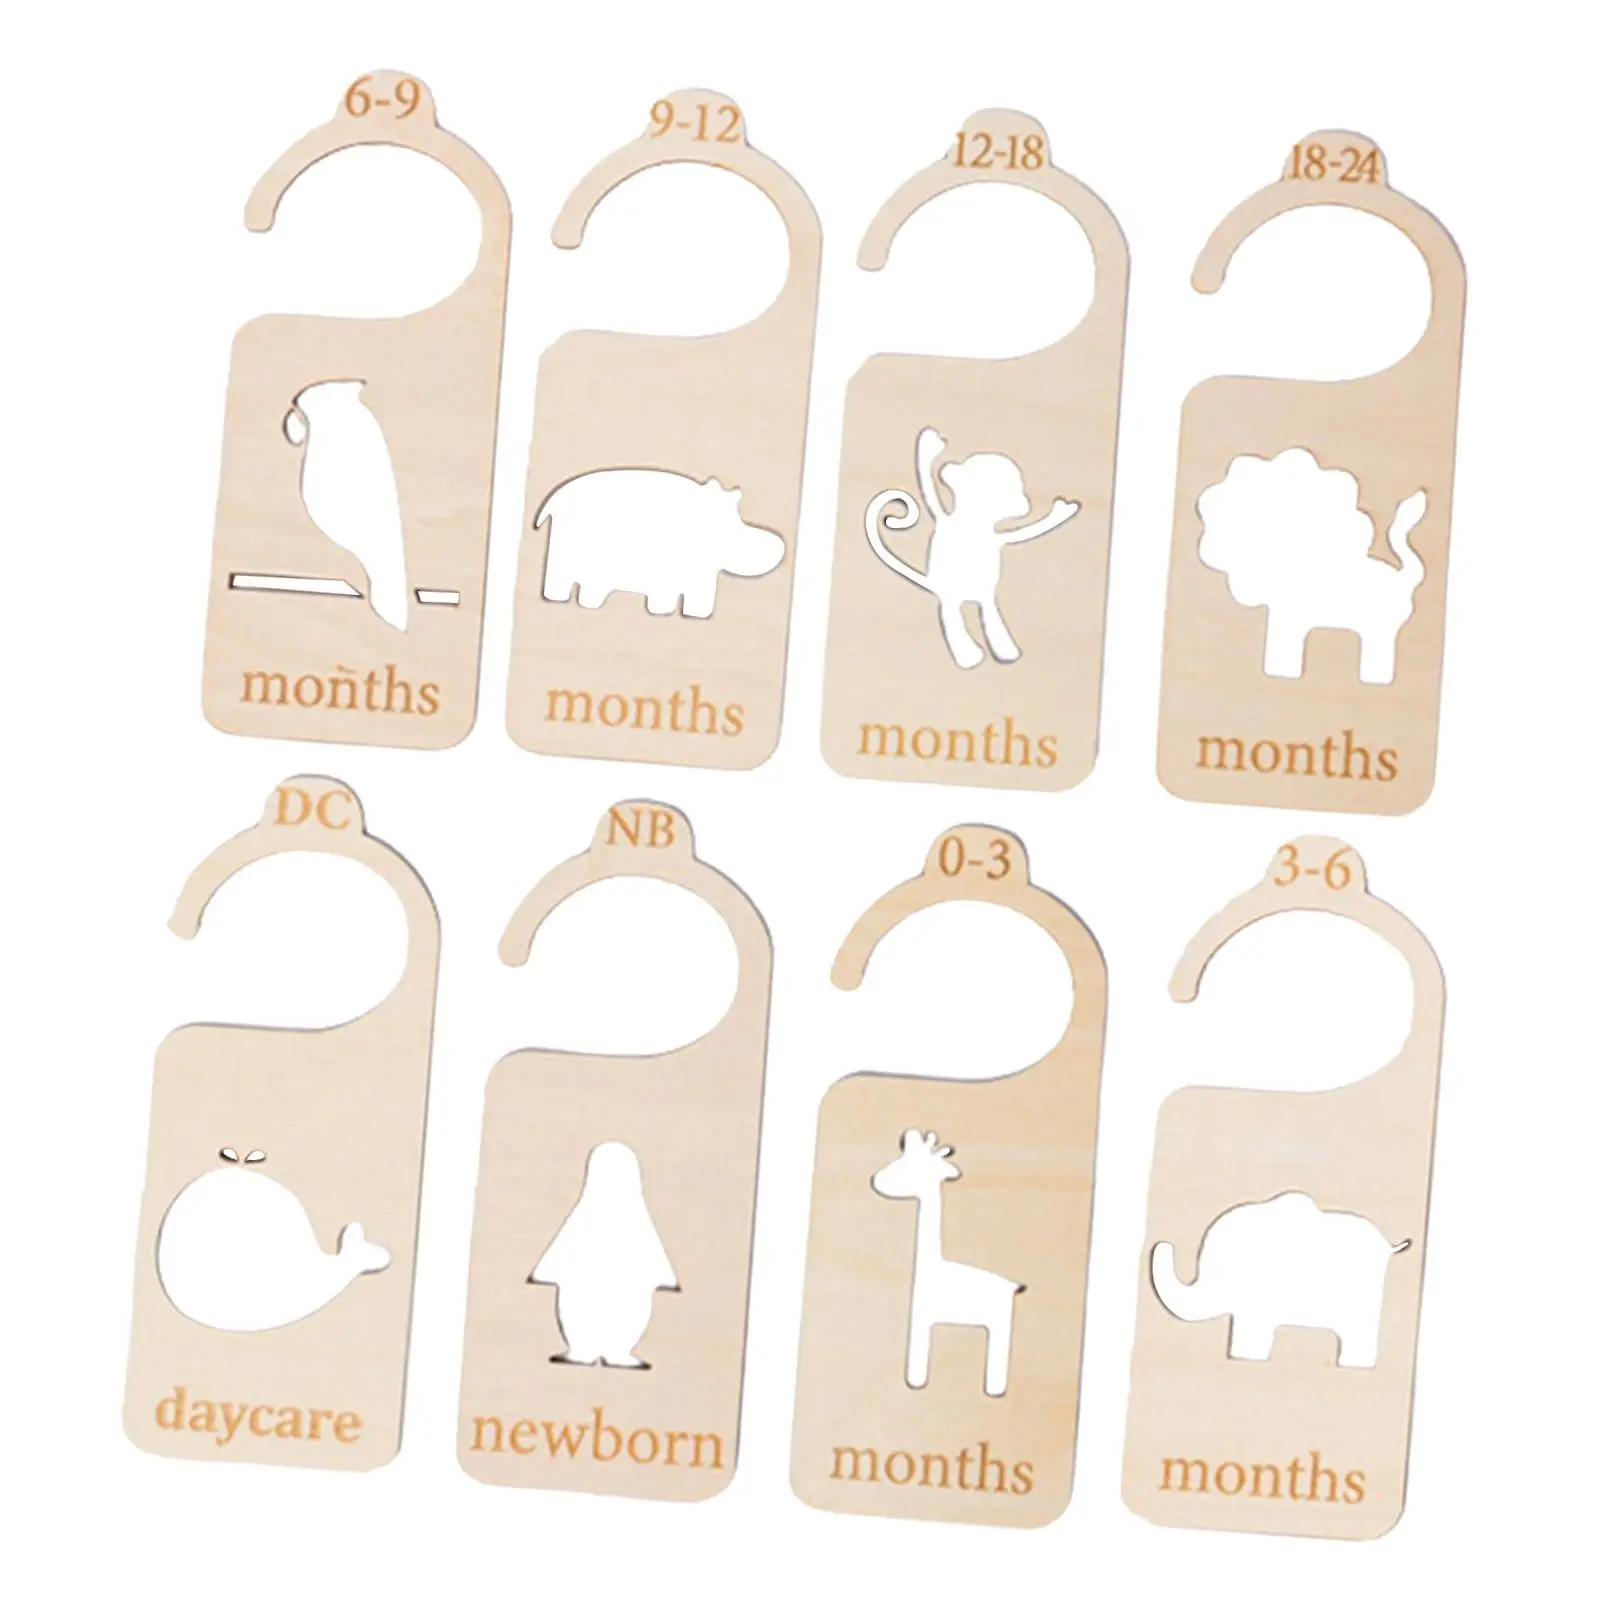 8 Pieces Wooden Baby Closet Size Dividers Cloth Size Organizers Hanger Adorable for Bedroom Clothes Home Wardrobe Nursery Decors